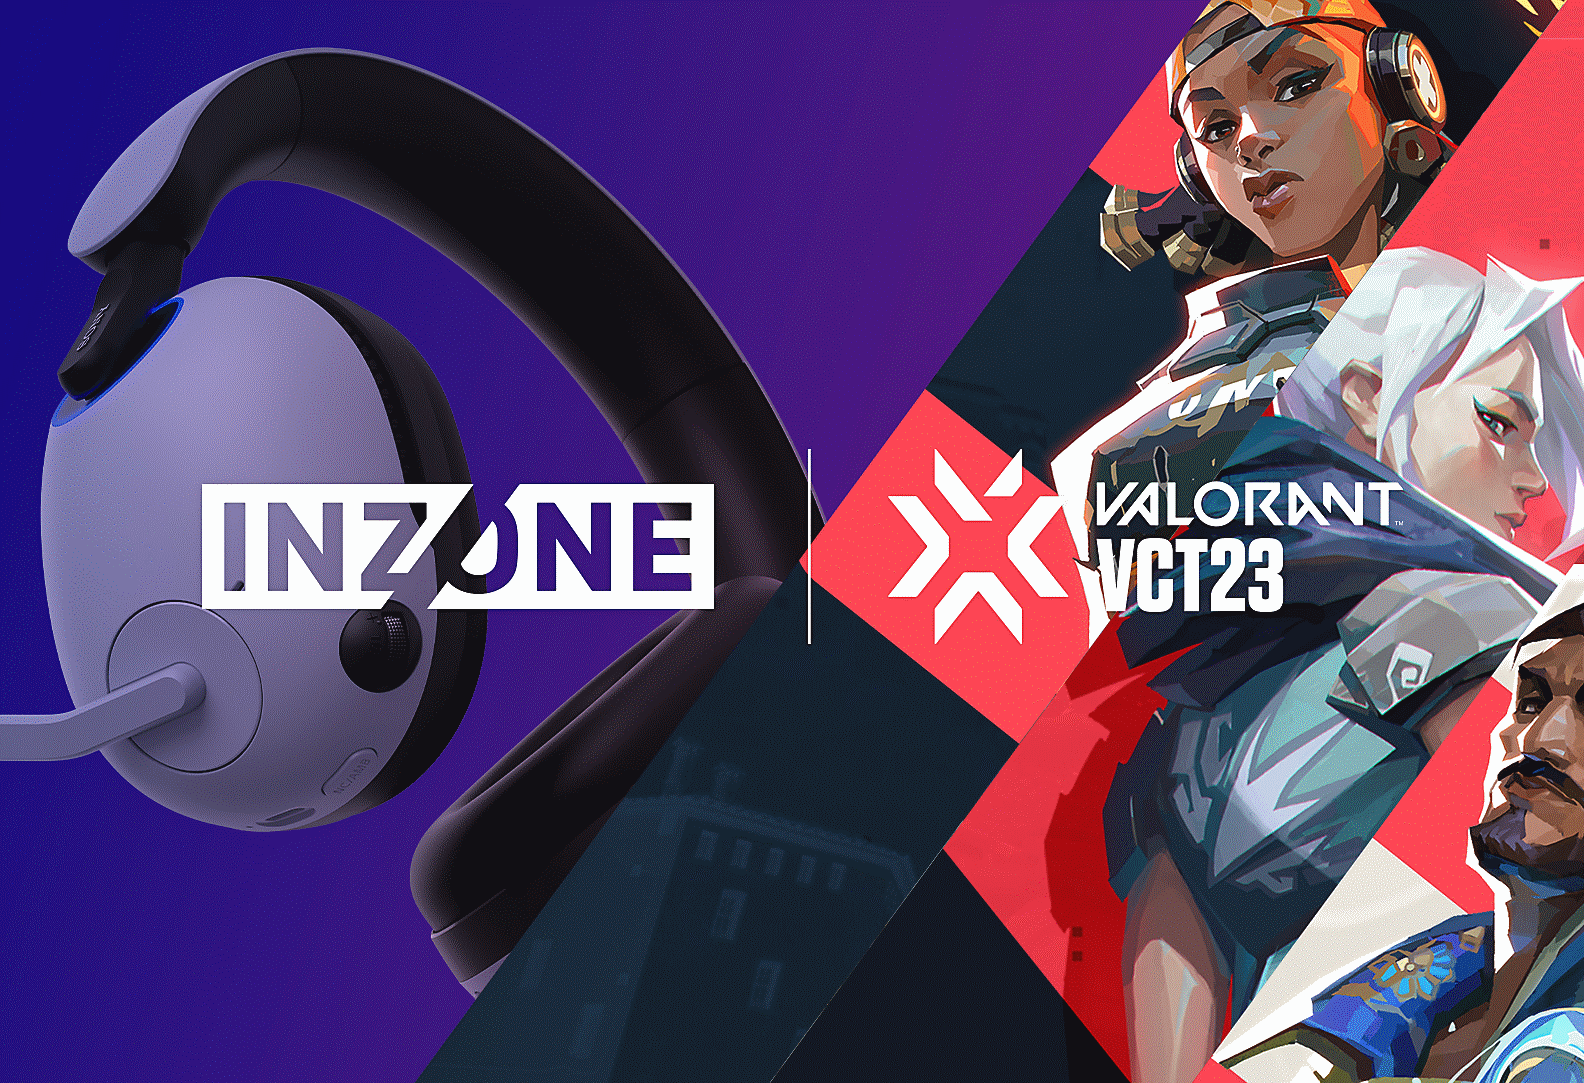 Image of the Sony INZONE H9 gaming headset with VALORANT characters and INZONE and VALORANT VCT23 logos